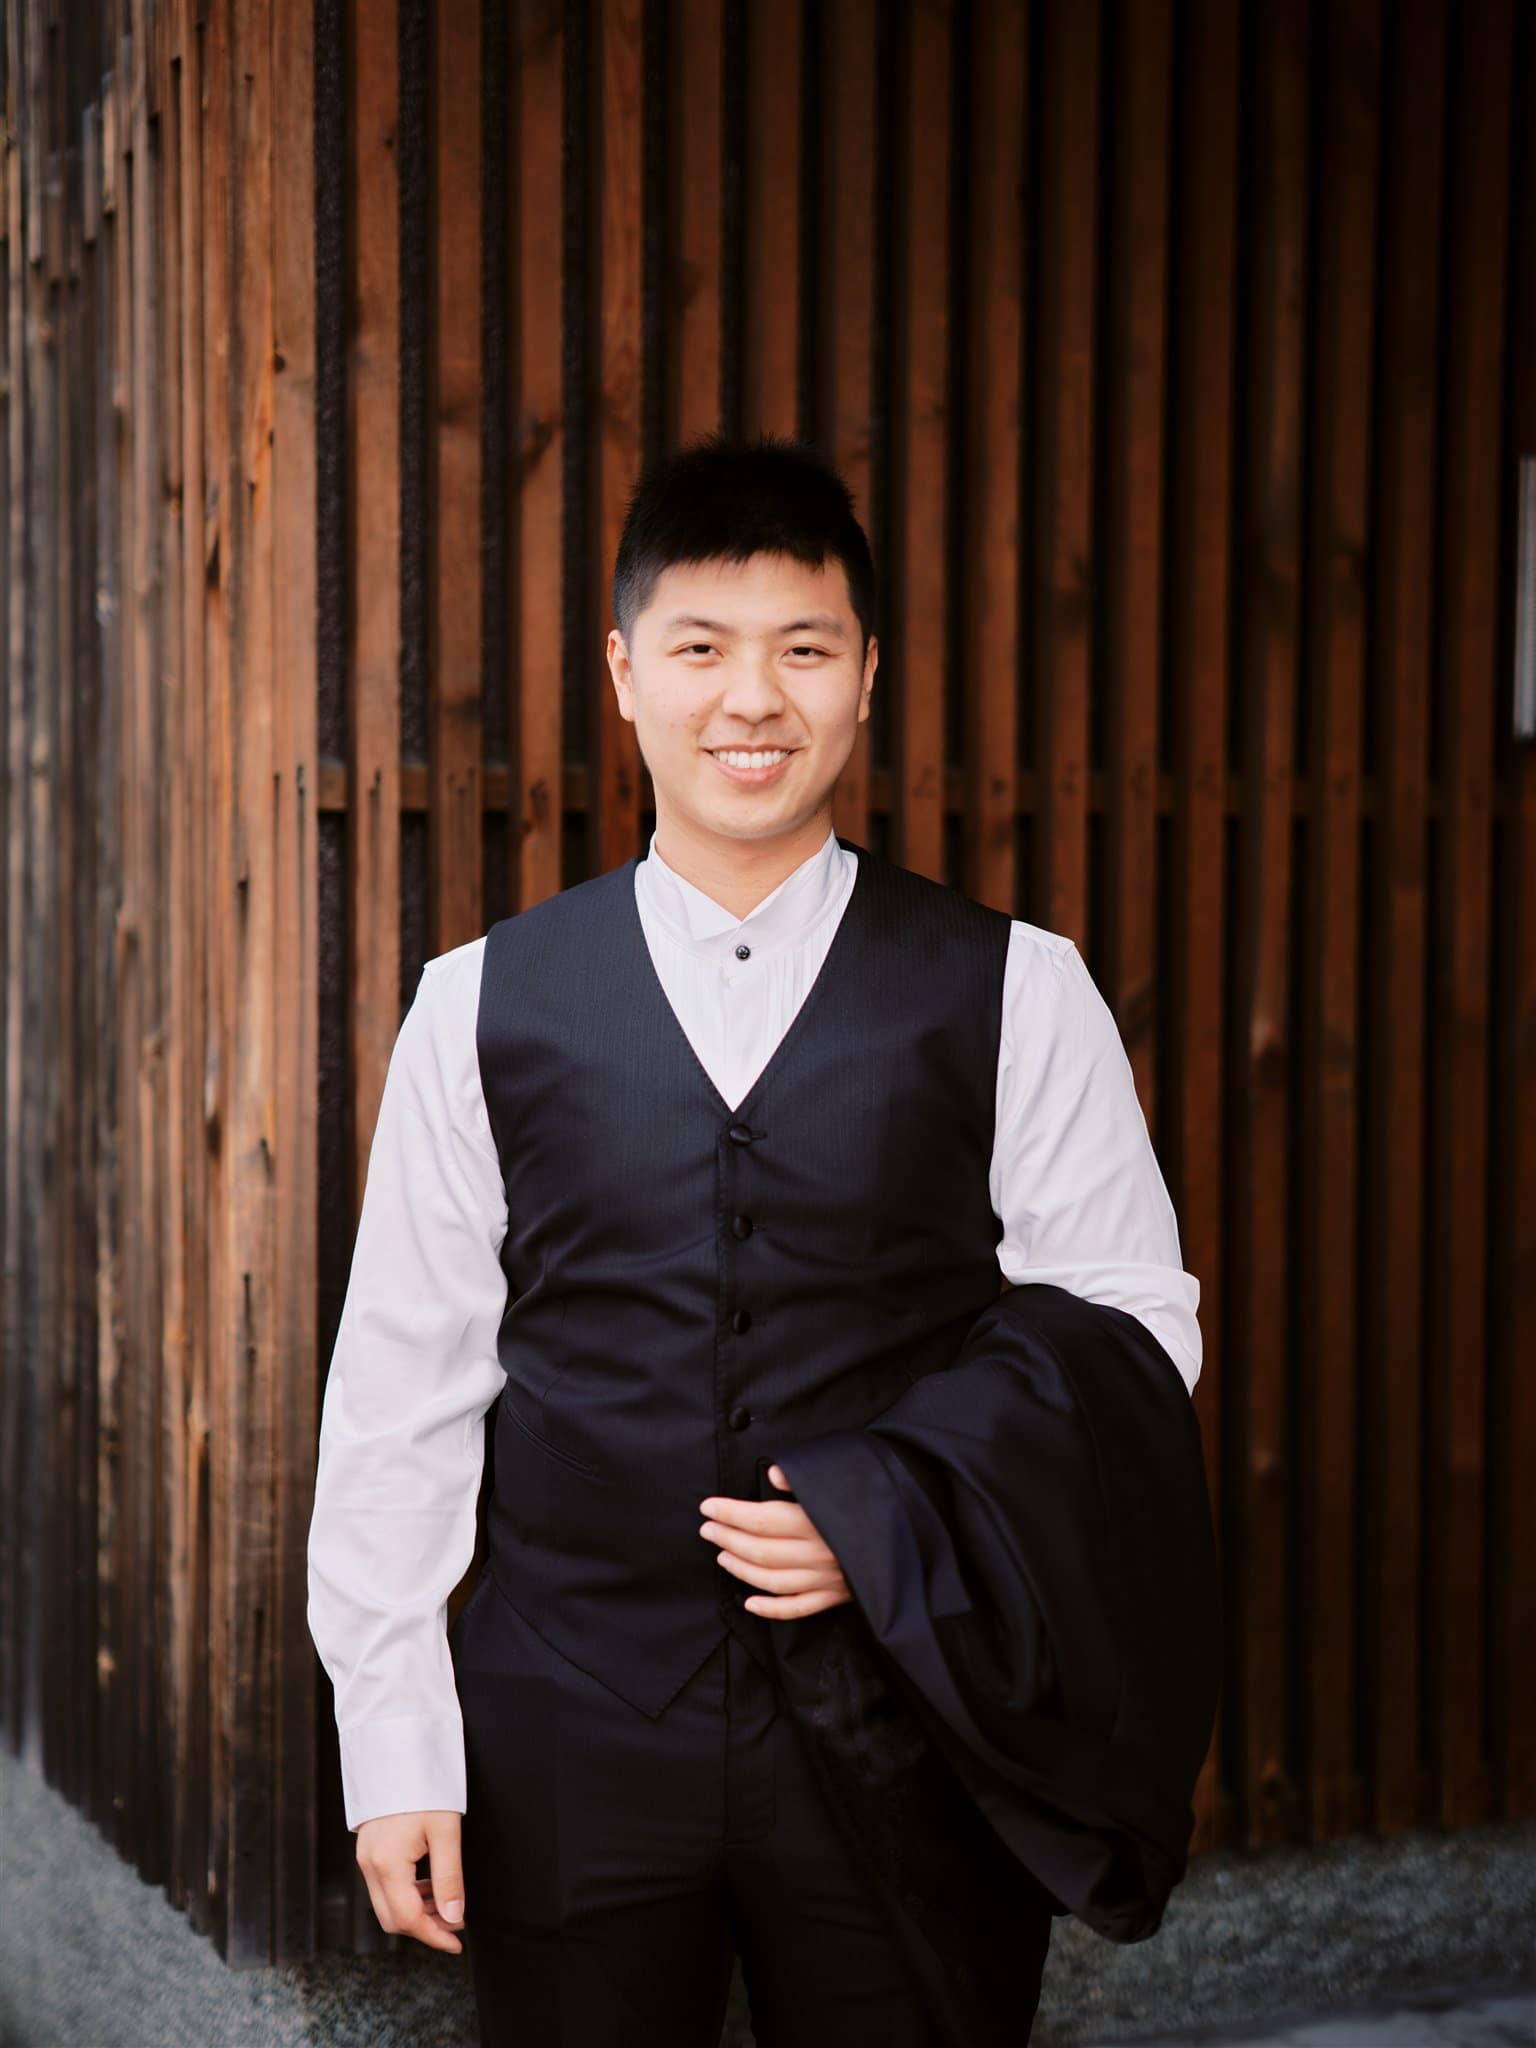 Kyoto Tokyo Japan Elopement Wedding Photographer, Planner & Videographer | A young man in a black vest and white shirt, capturing romantic moments as a Japan elopement photographer.